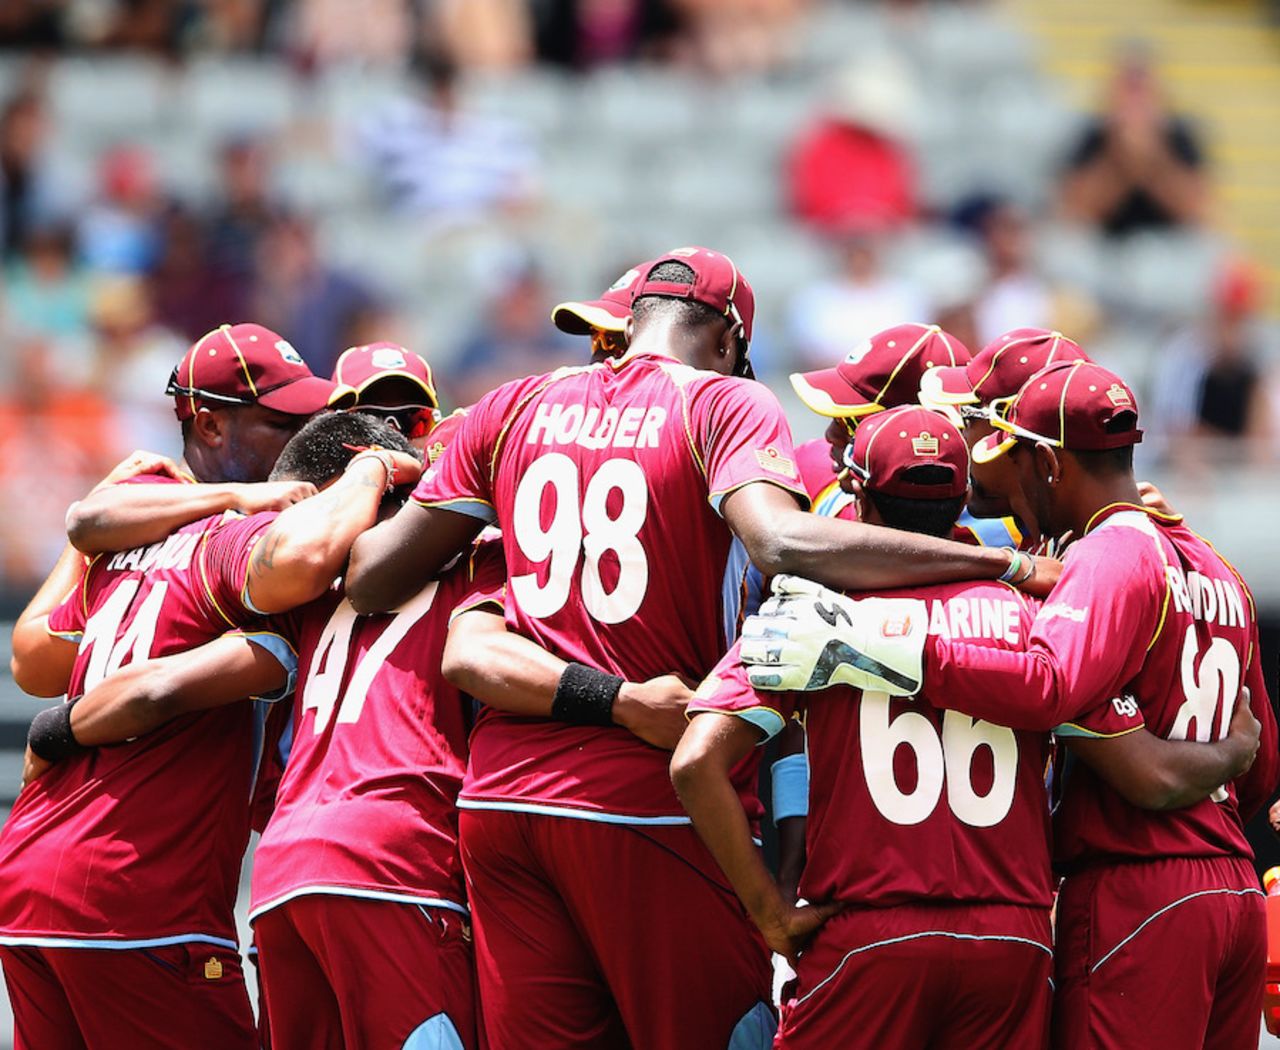 West Indies players get into a huddle after the dismissal of Martin Guptill, New Zealand v West Indies, 1st ODI, Auckland, December 26, 2013